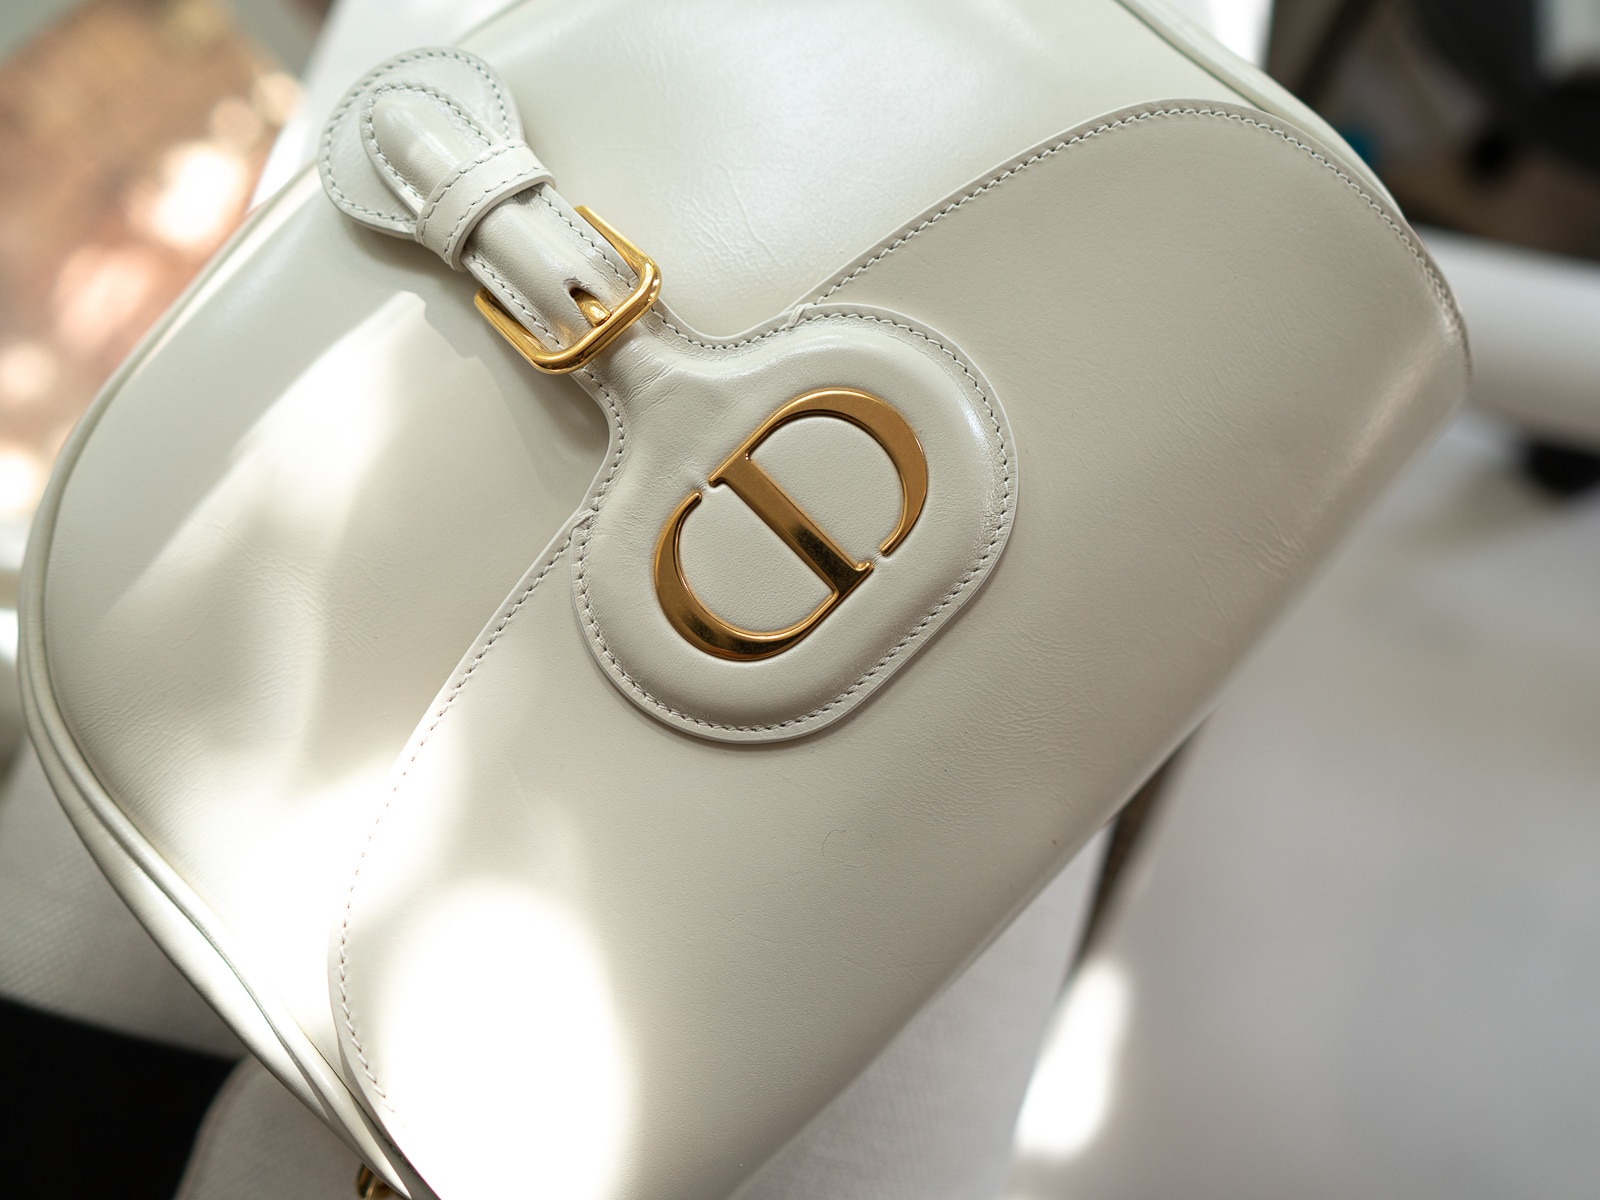 What Is Dior's Bobby Bag And Why Do Celebs Love It?